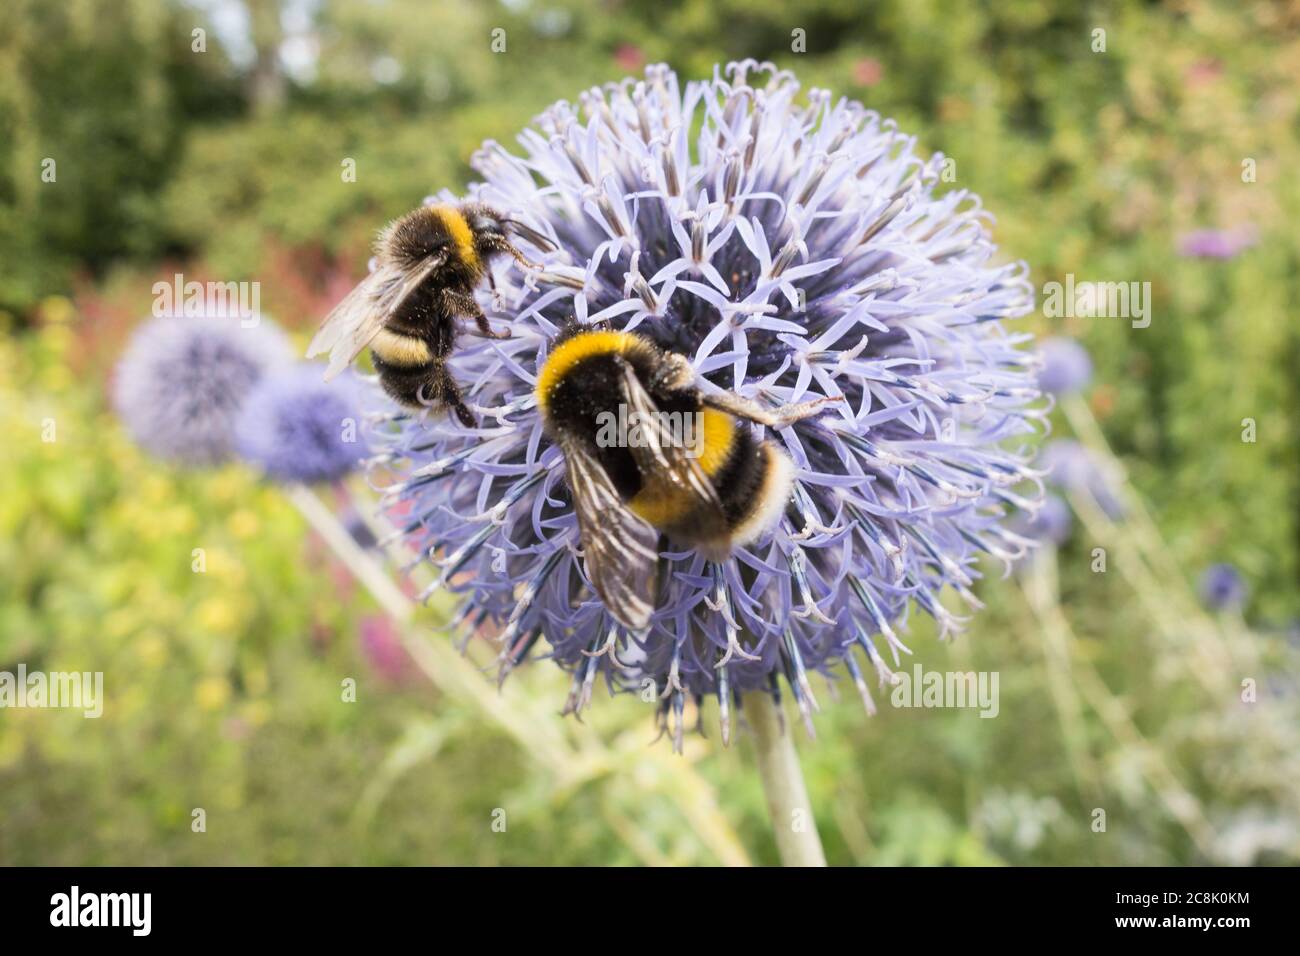 Closeup of a Buff-tailed bumblebee collecting pollen on a Blue Globe Thistle (Echinops bannaticus) Stock Photo